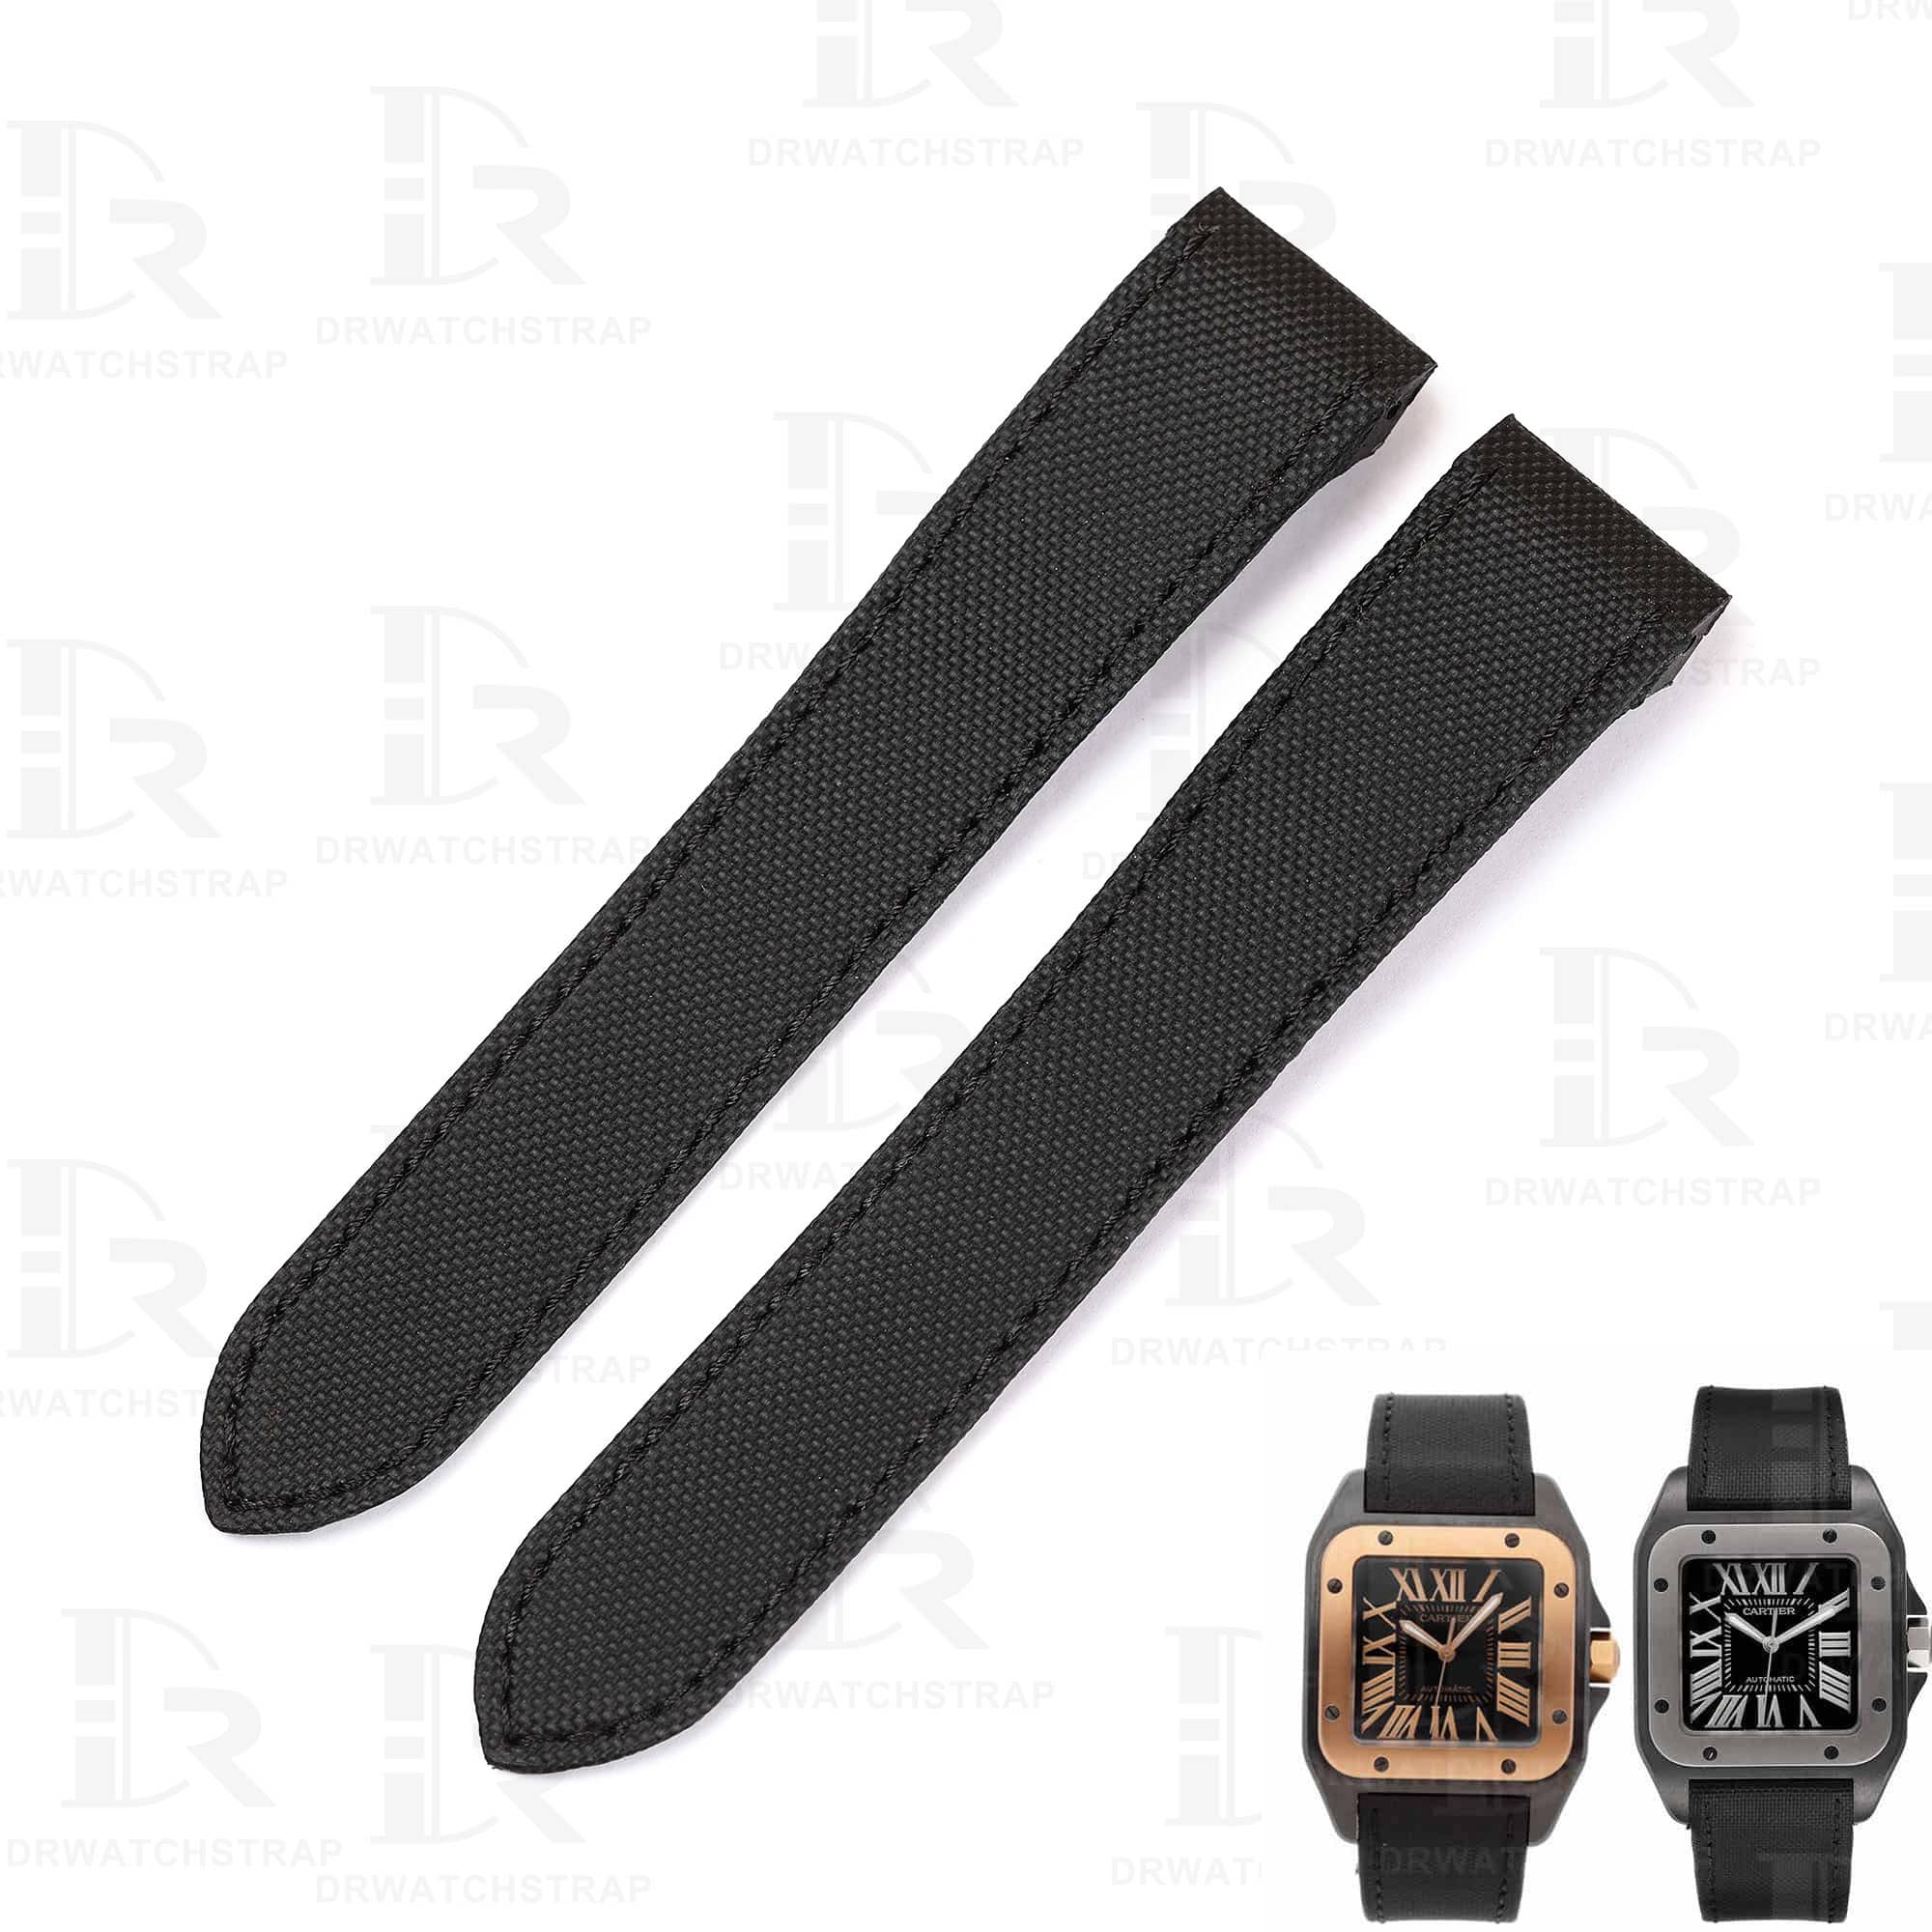 Black nylon watch strap for Cartier De Santos 100 from DR Watchstrap with premium canvas kevlar material